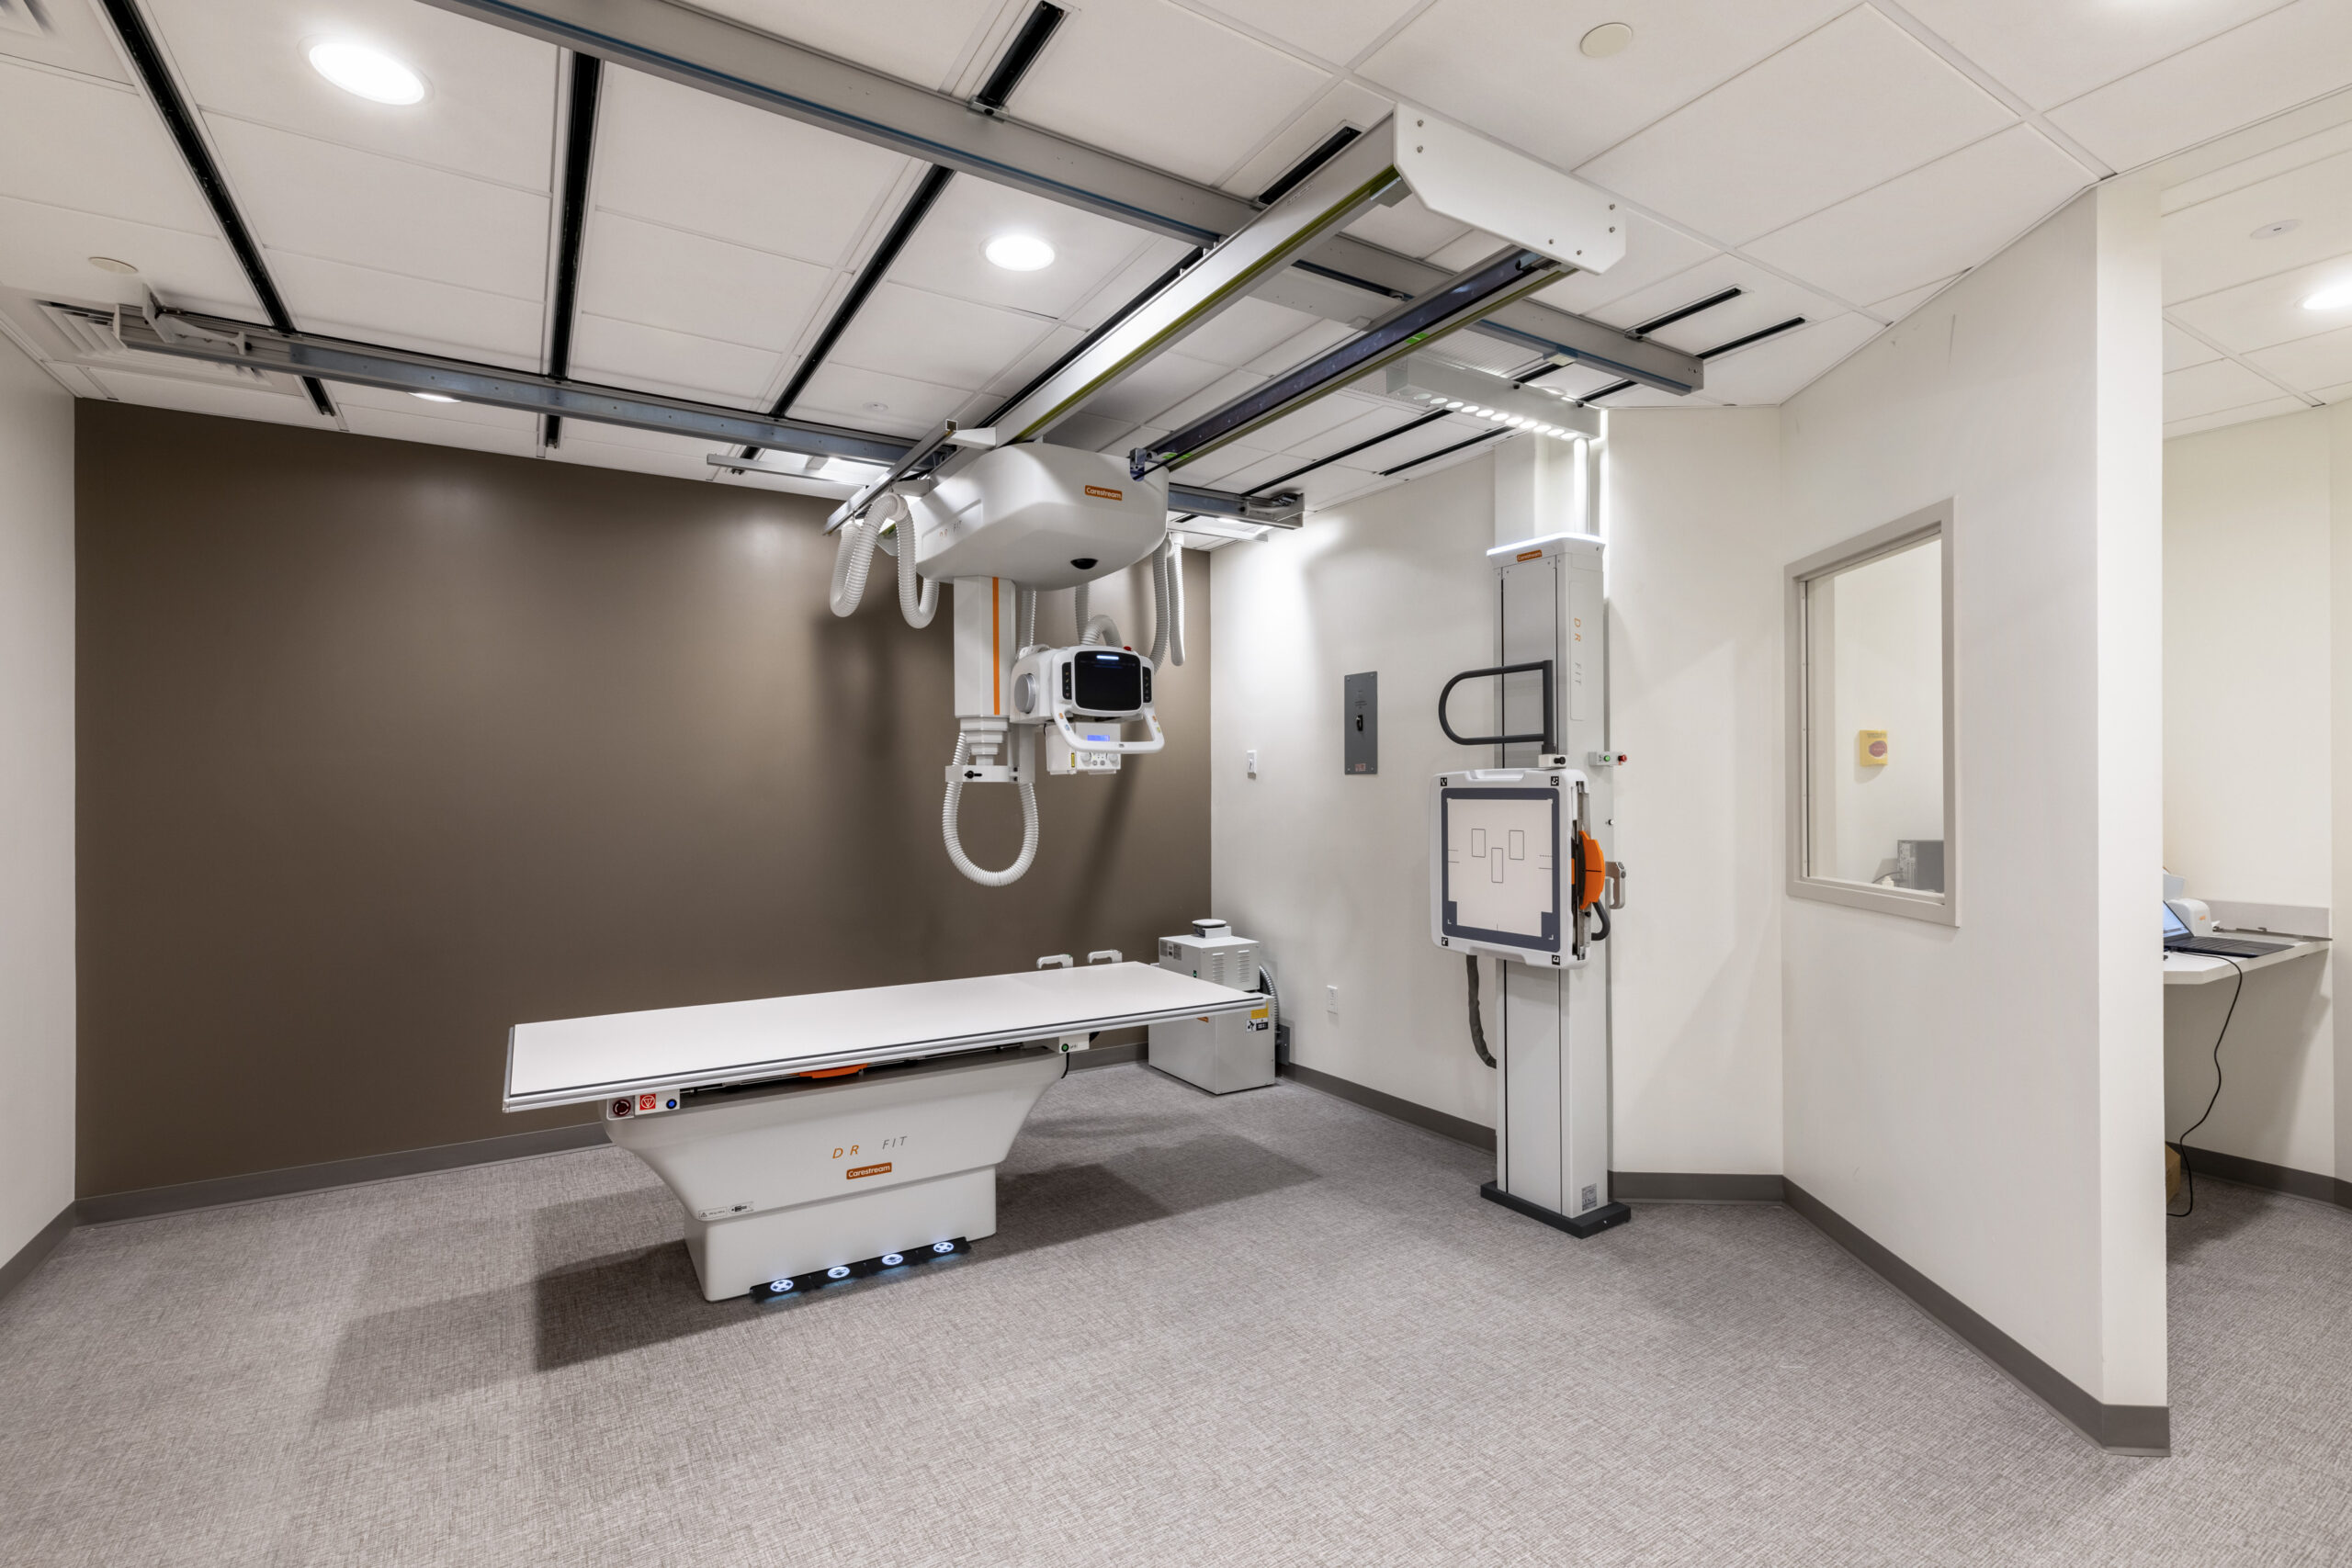 Speed to Square Footage: Wise Completes 50,000 SF Multi-Specialty Outpatient Clinic in 10 Months